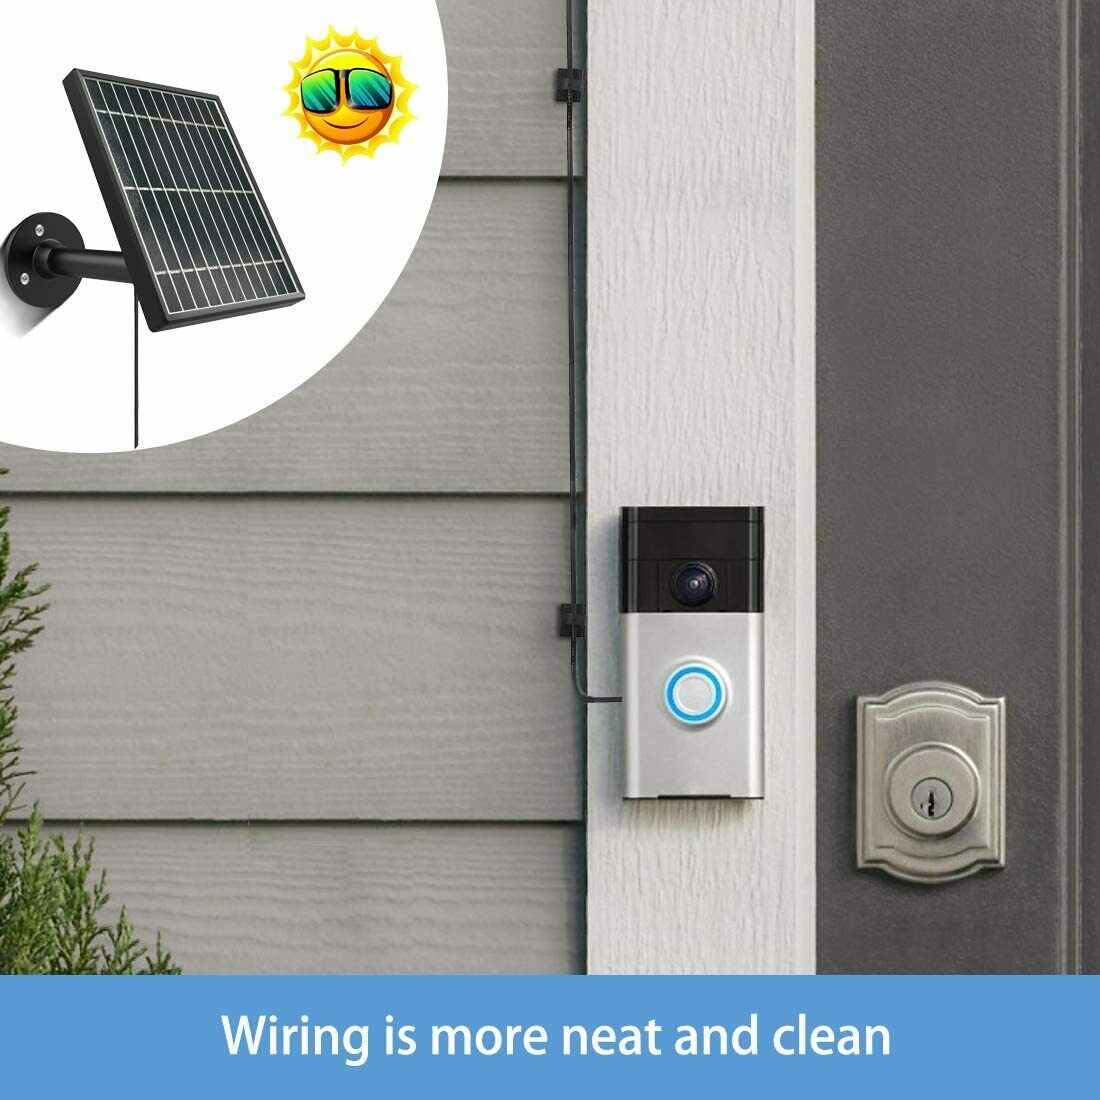 Solar panel for Ring Video Doorbell 3/3 Plus,3.5W Output(No Include Camera)